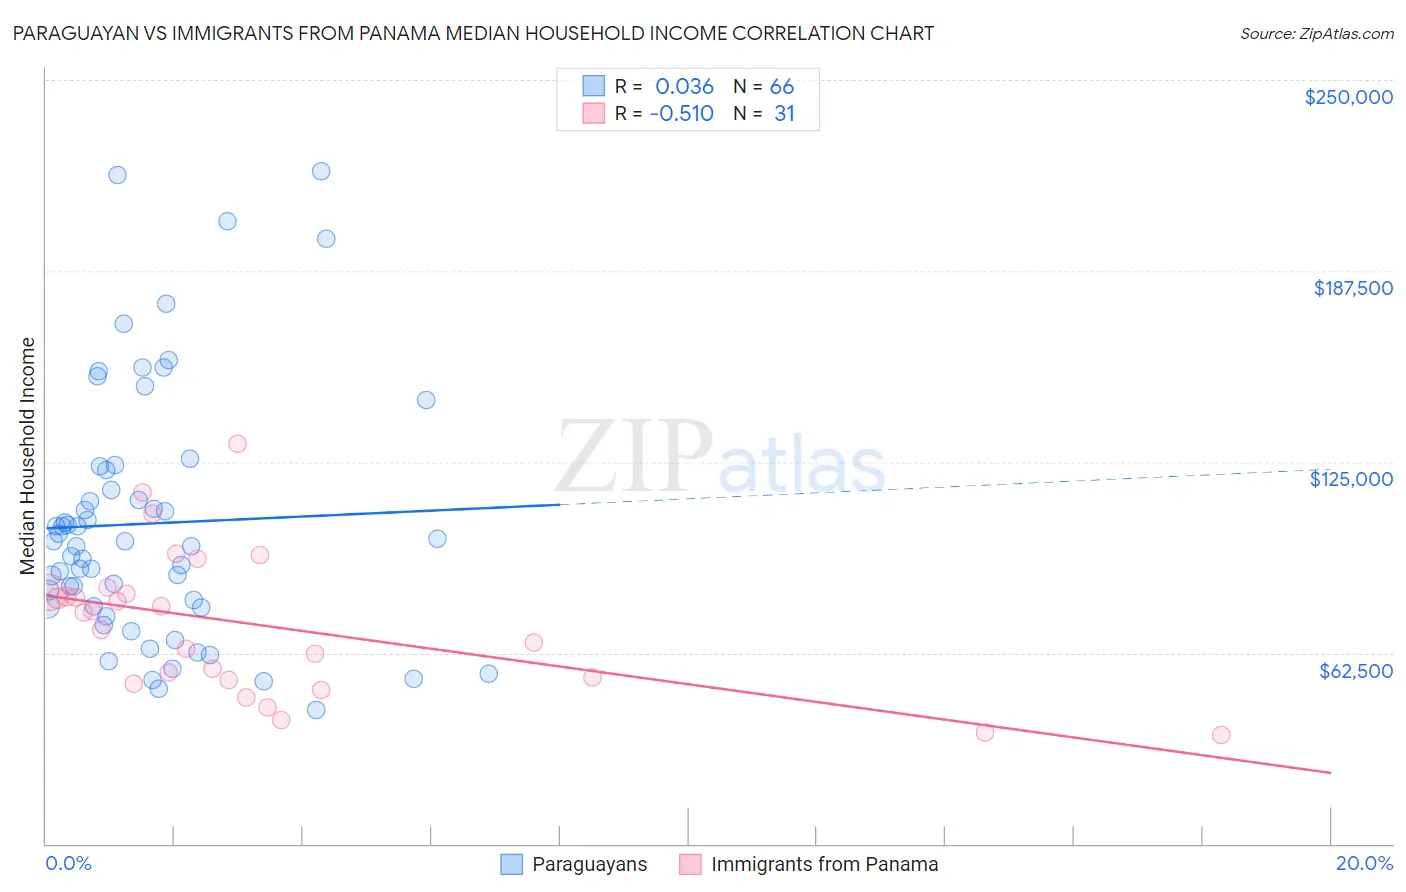 Paraguayan vs Immigrants from Panama Median Household Income